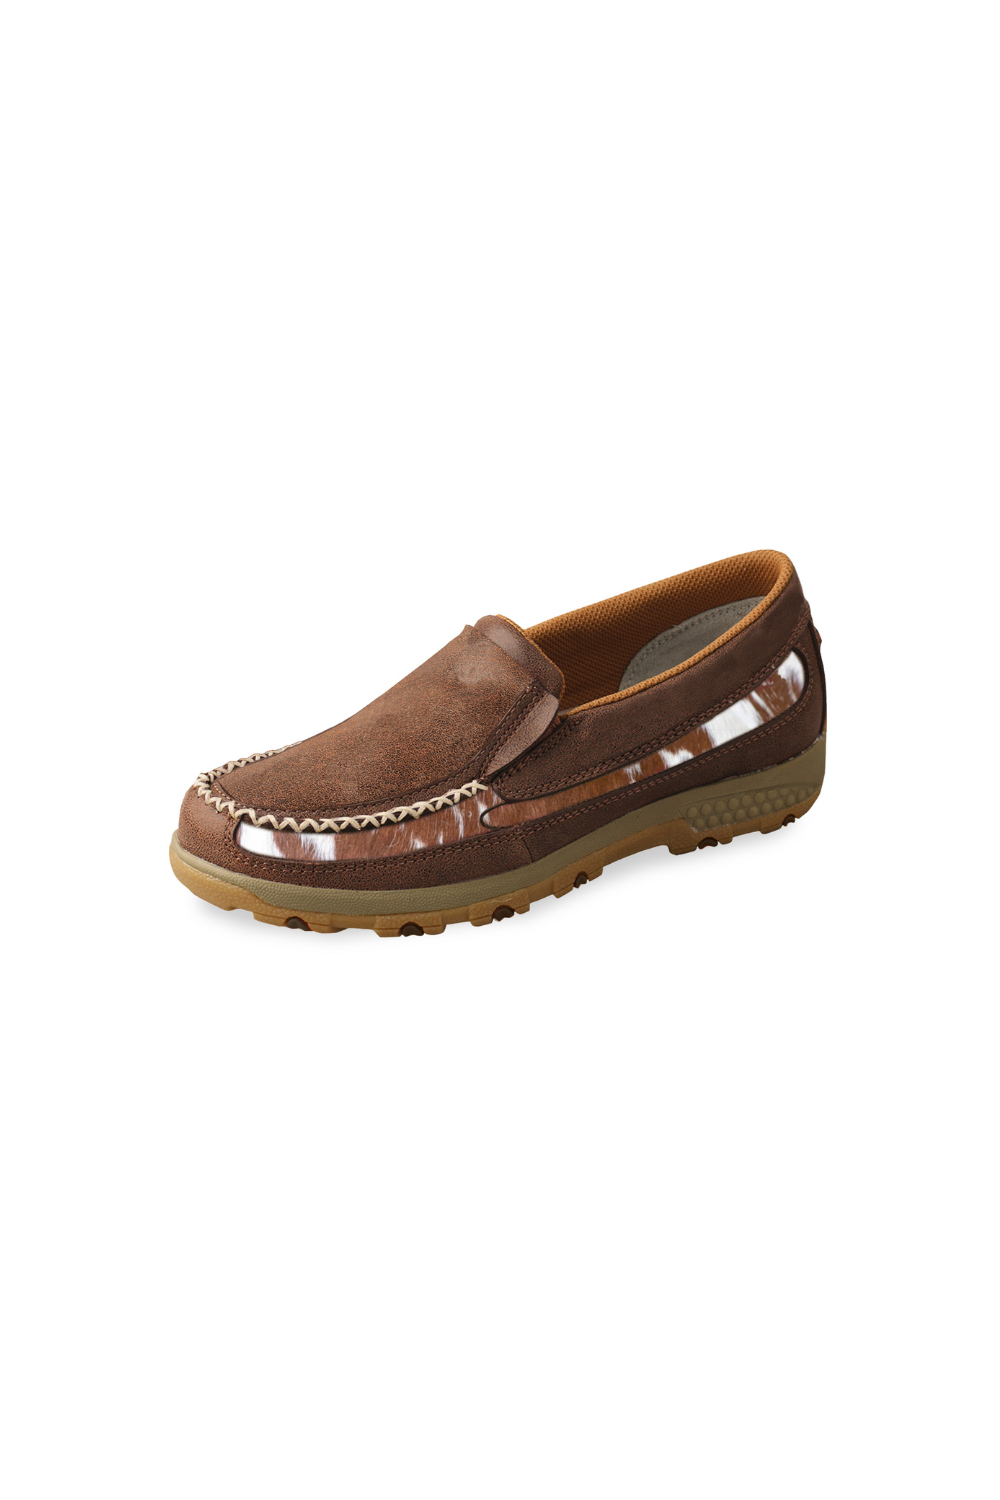 Casual Cow Fur Cell Stretch Mocs Slip OnCASUAL